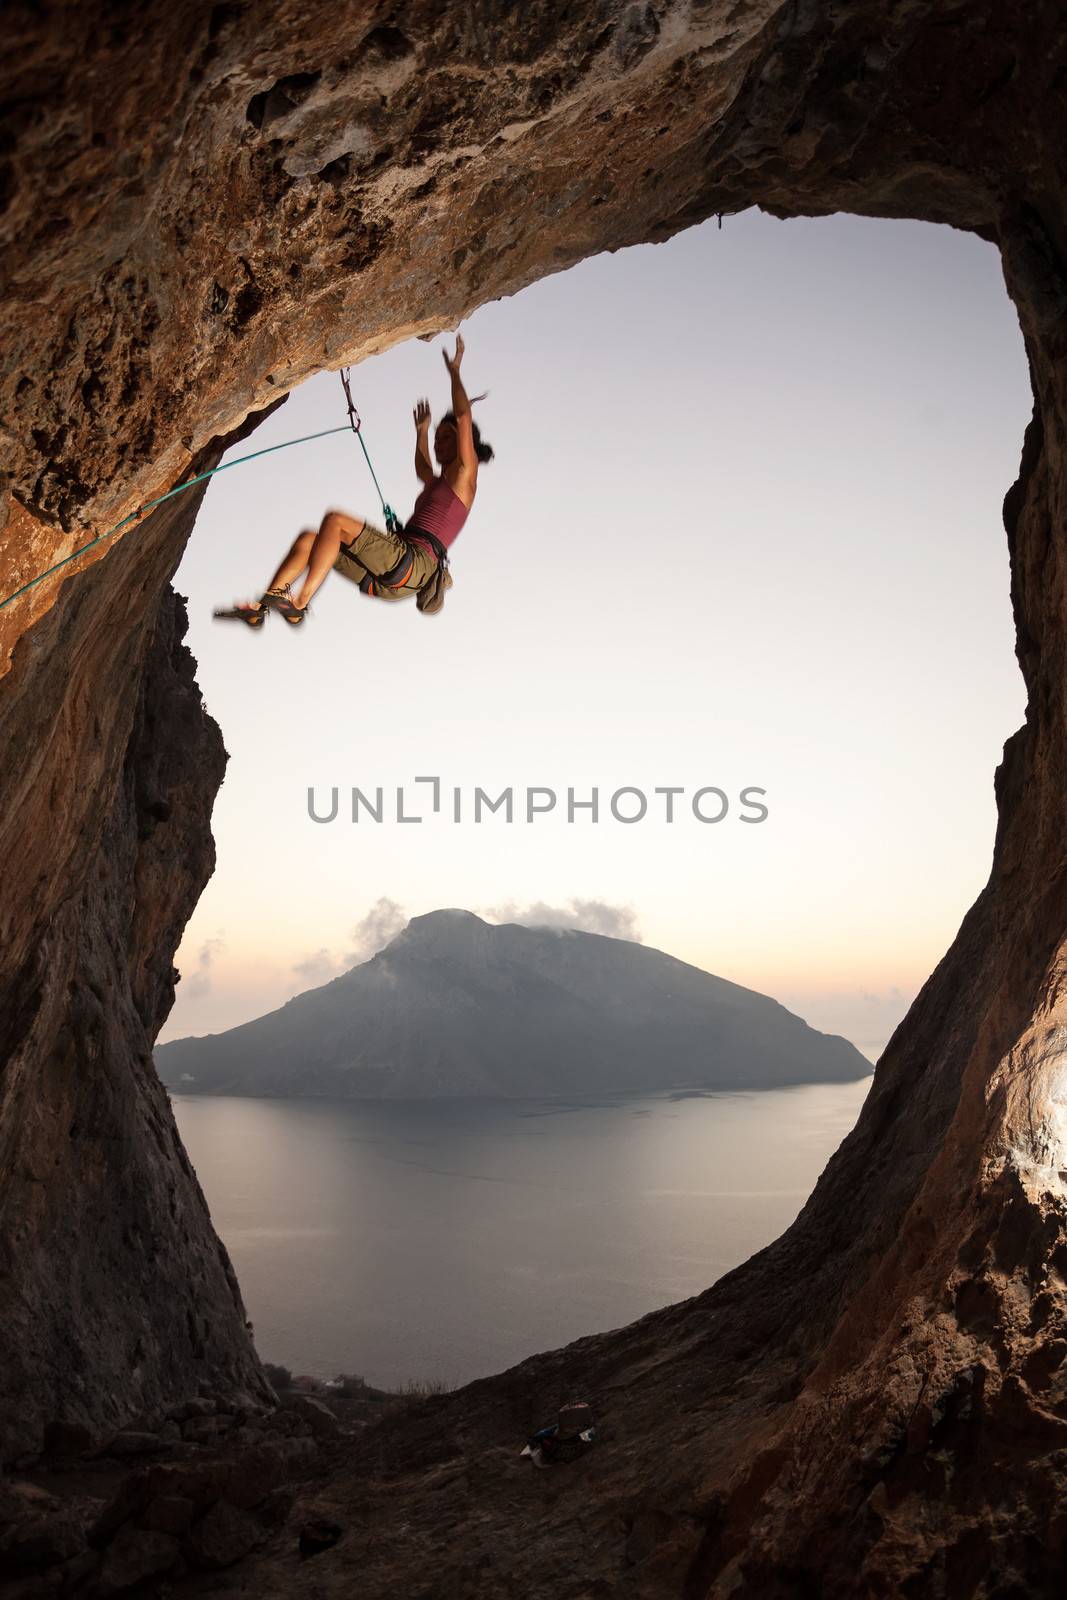 Climber falling of a cliff while lead climbing by photobac